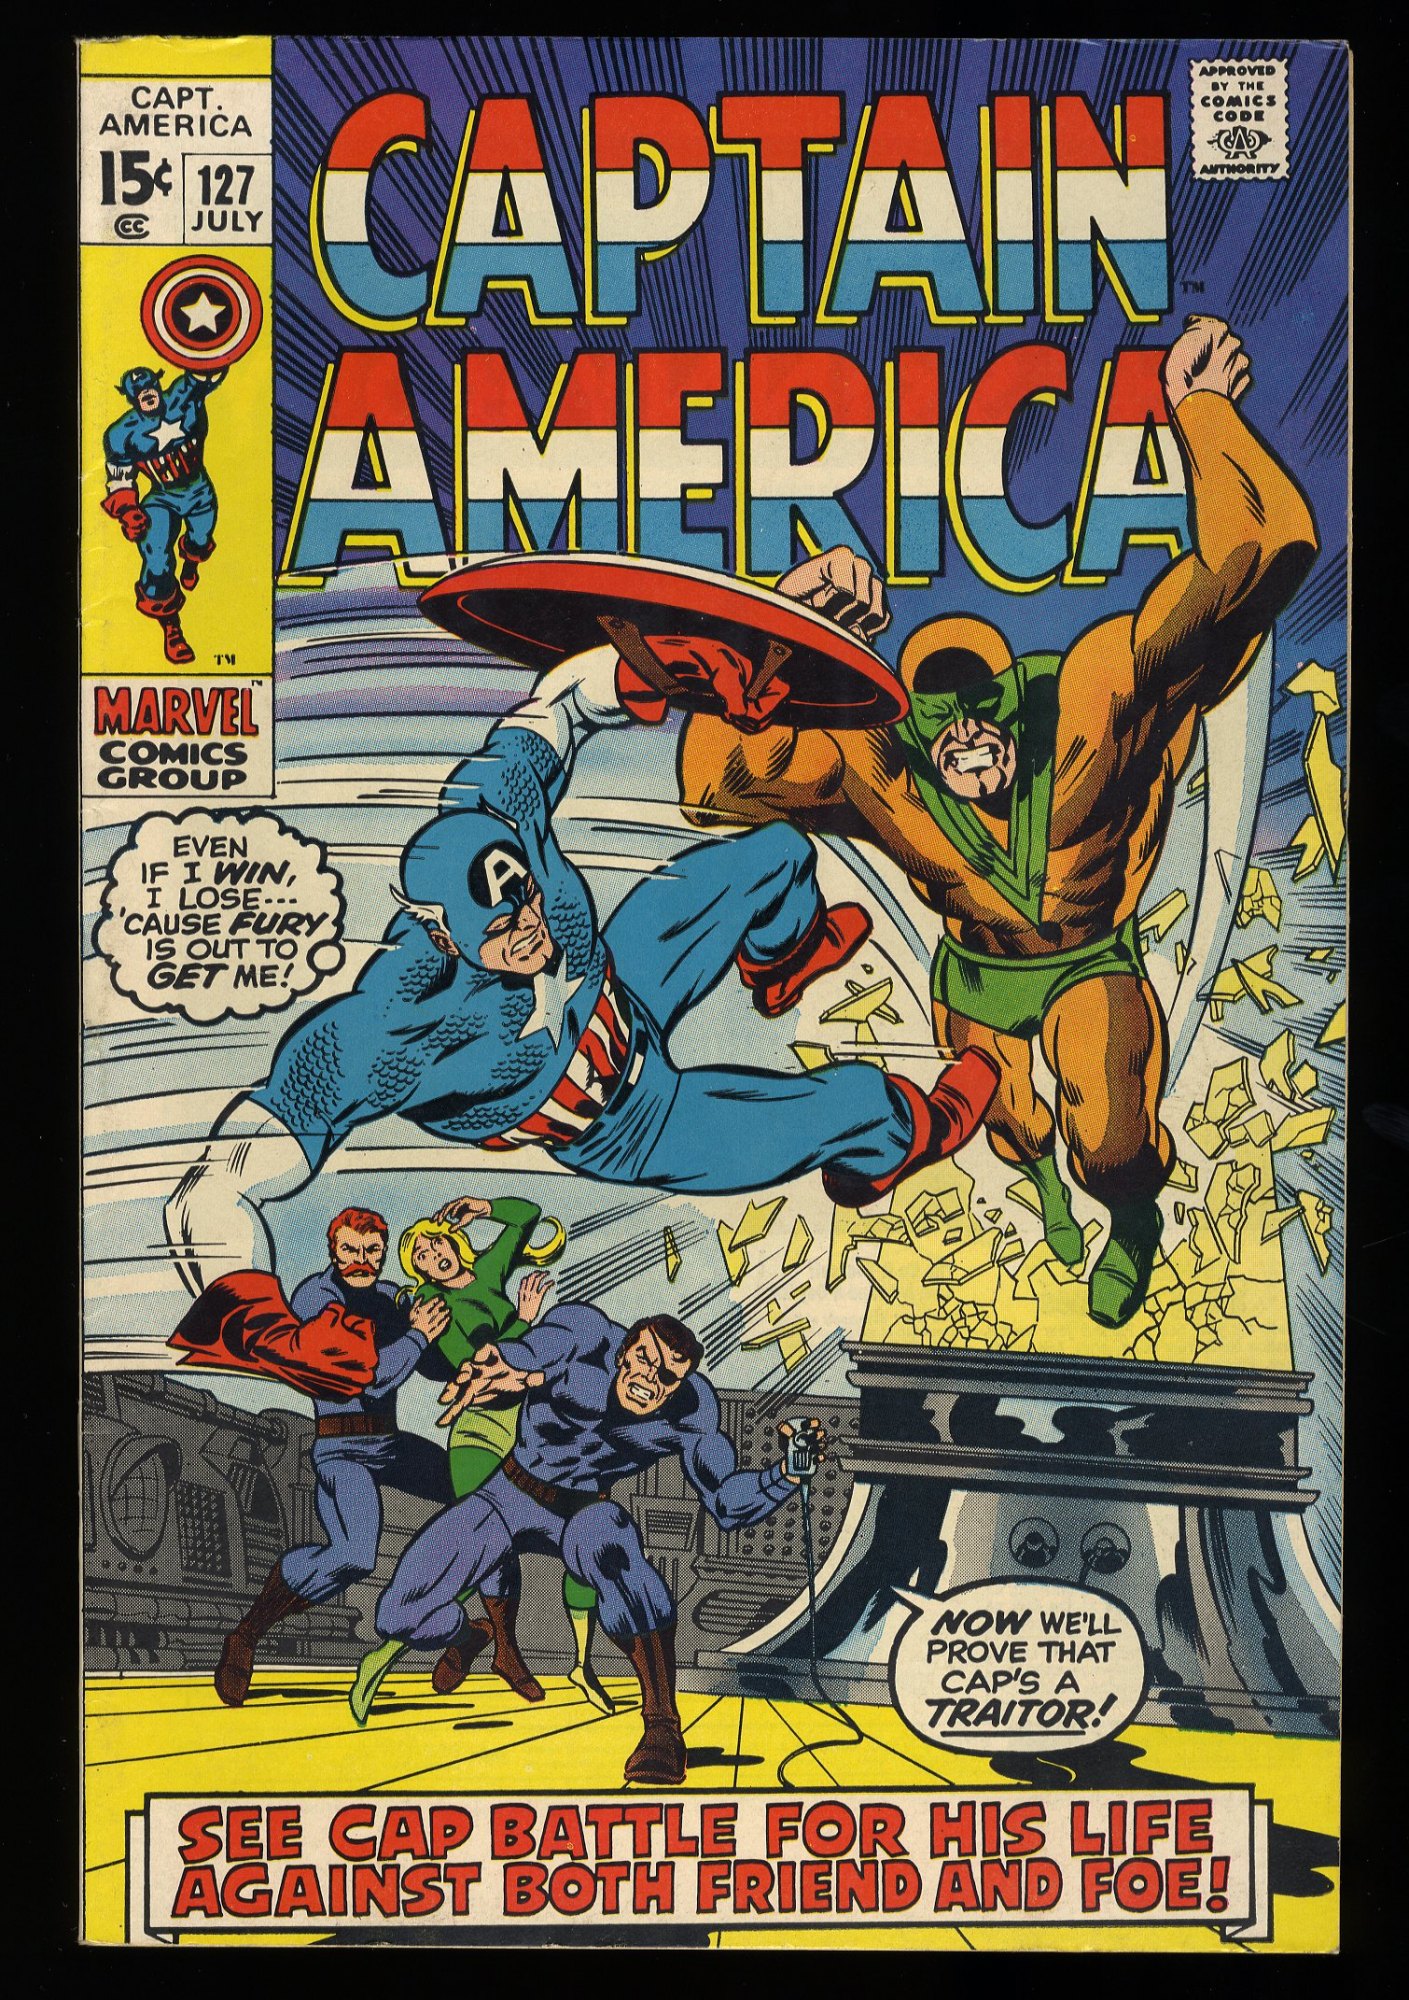 Image: Captain America #127 NM- 9.2 Who Calls Me Traitor! Marie Severin Cover!